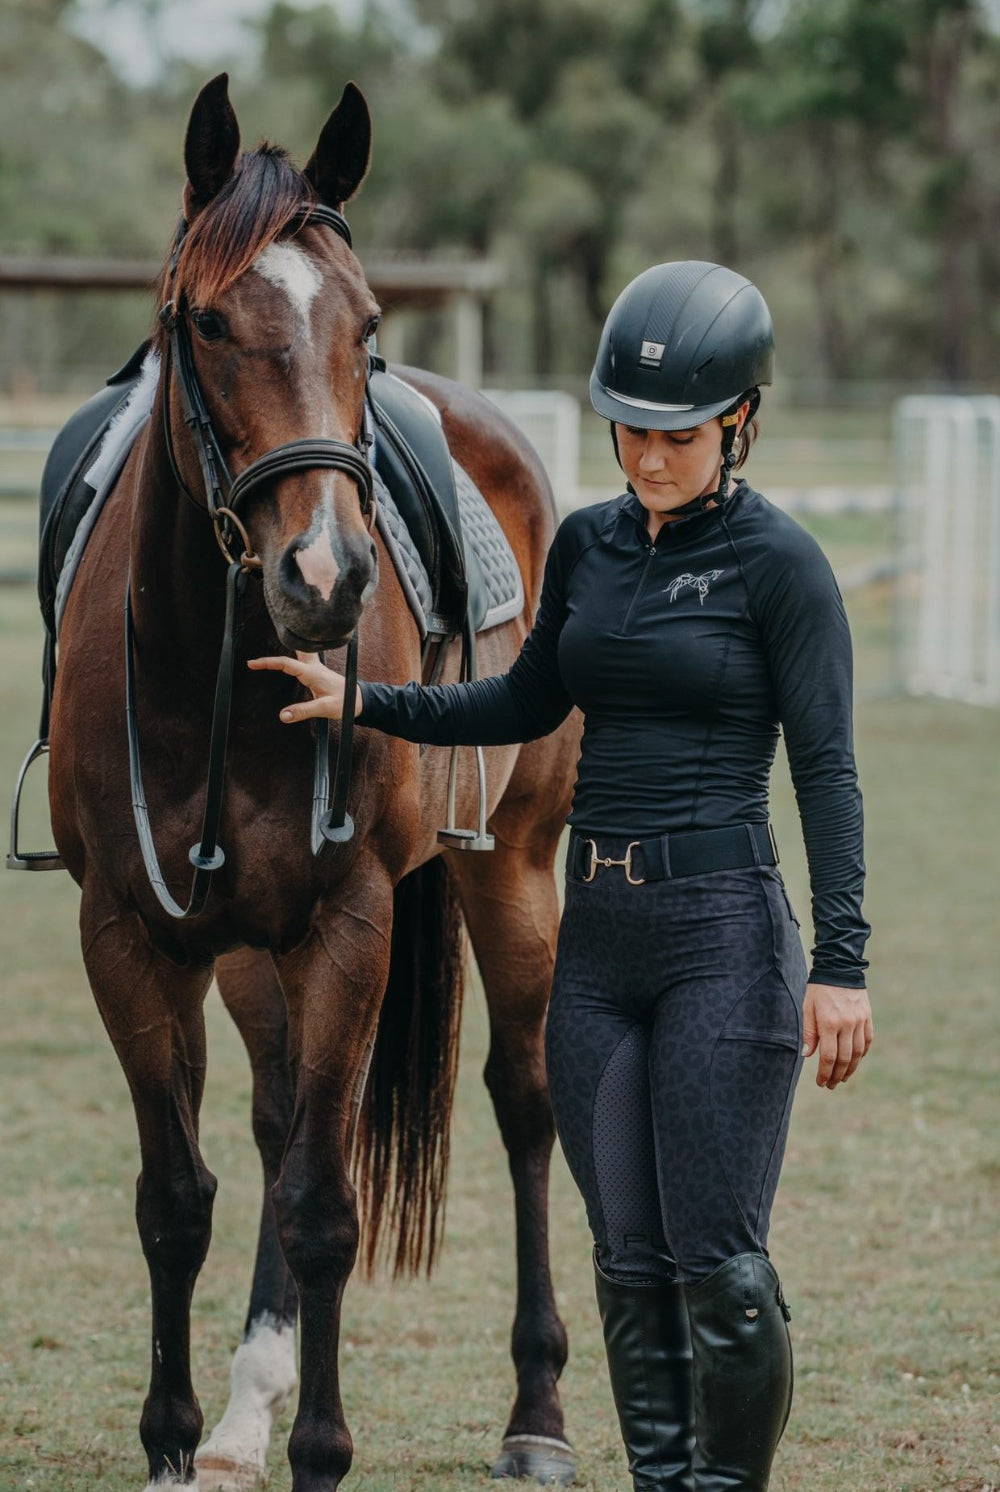 A person dressed in equestrian attire, including a helmet, long-sleeved shirt made of performance fabric, and Fusion Tights - Black Leopard by Pure Canter riding boots, stands beside a brown horse. The person is holding the horse's reins while gently touching its neck. They are outside on a green field with trees and fences in the background.